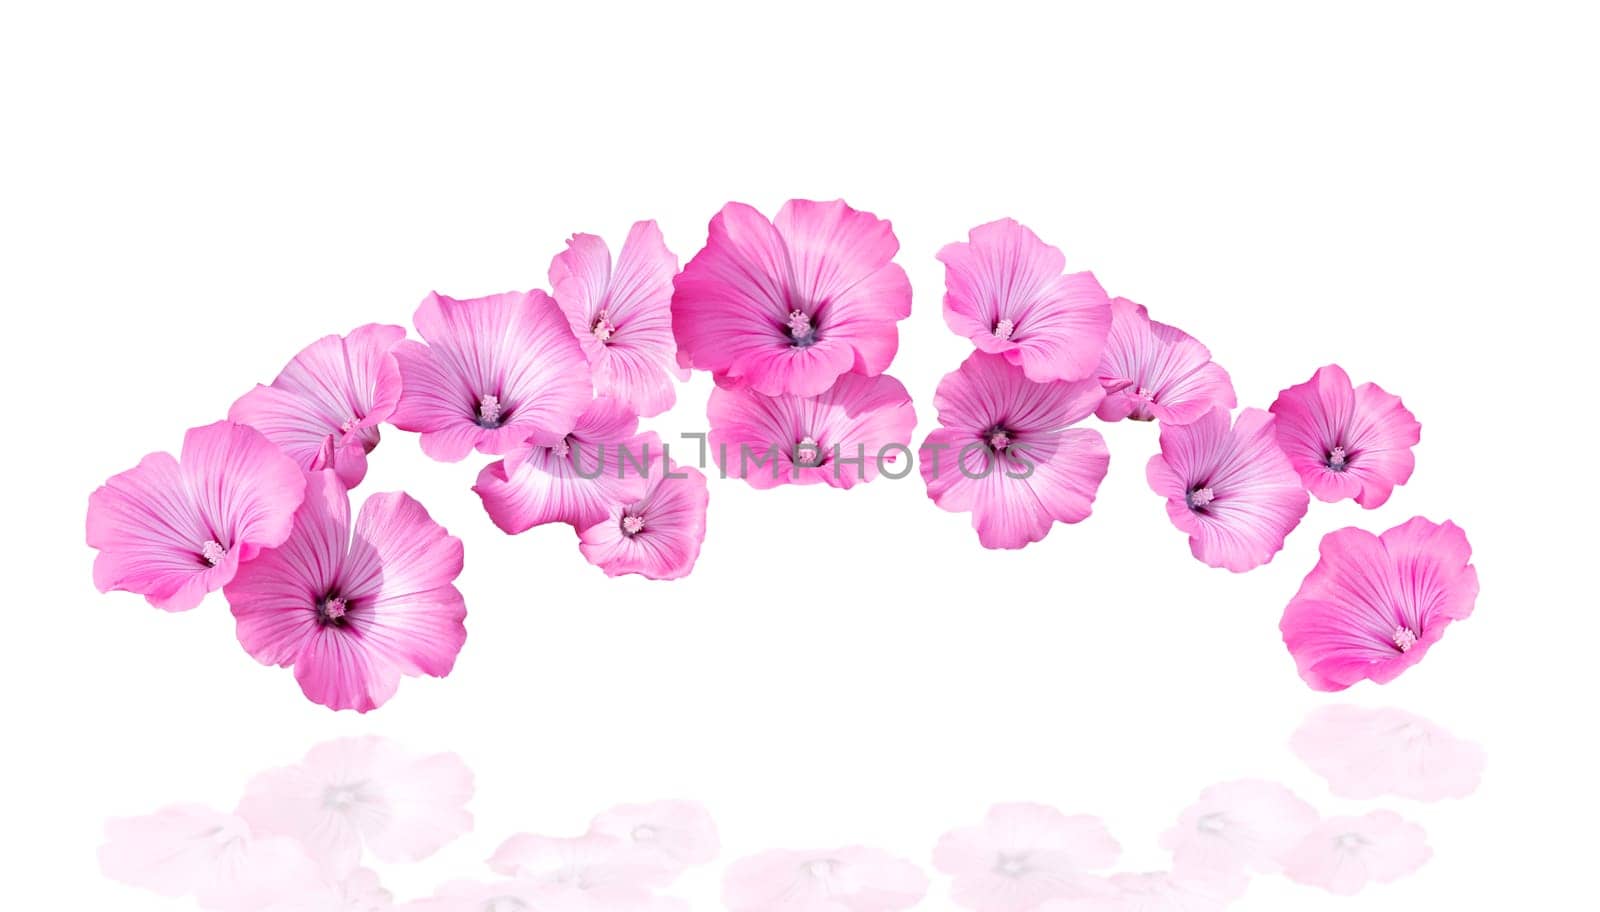 pink flowers with reflection on white background by drakuliren